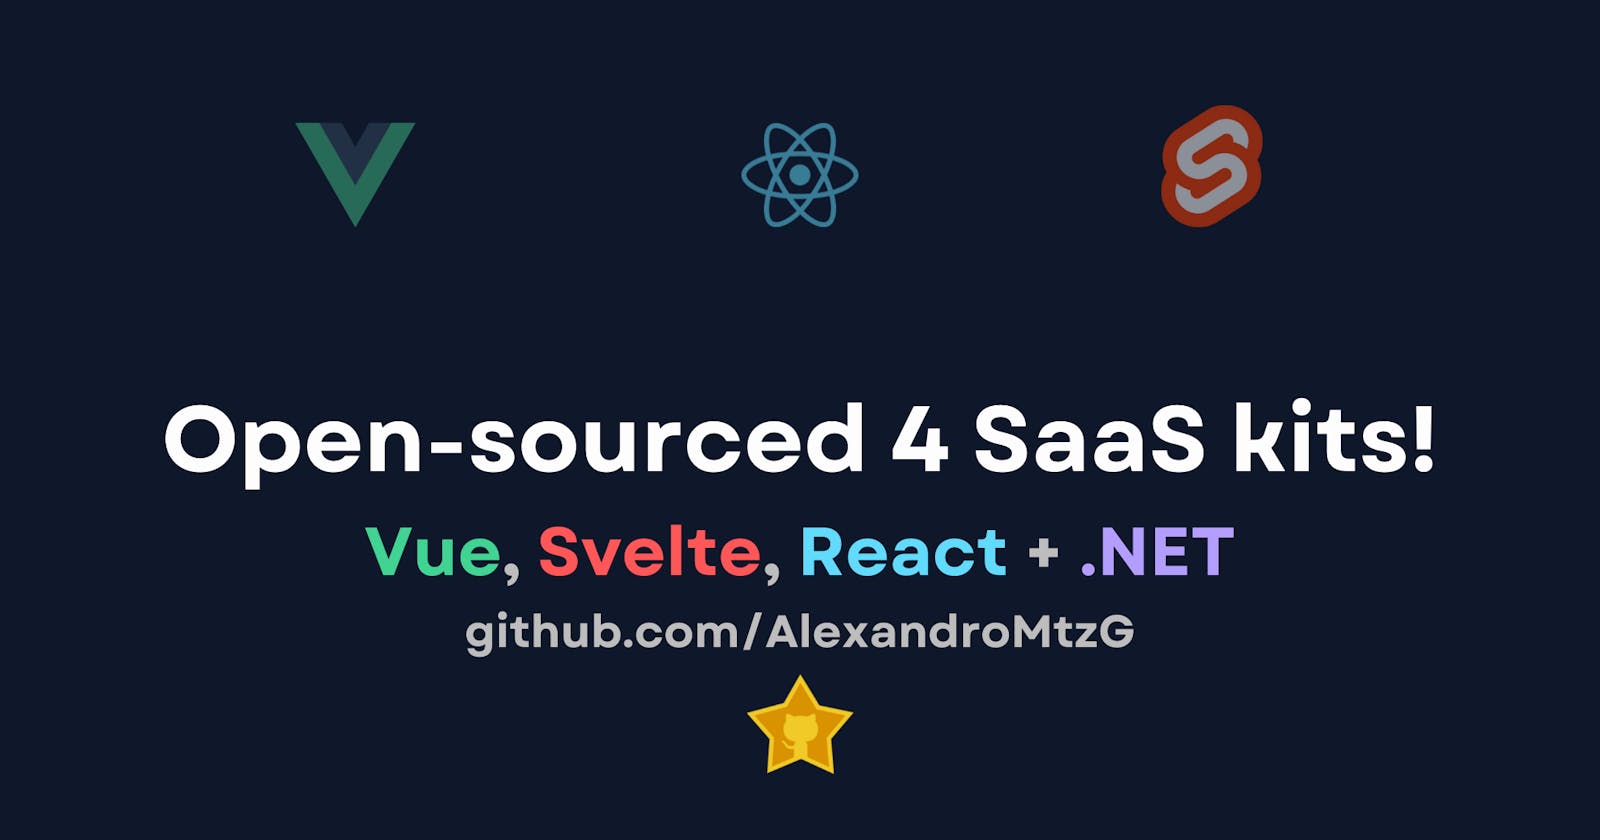 Open-sourced 4 SaaS kits - Vue, Svelte, React, and NET